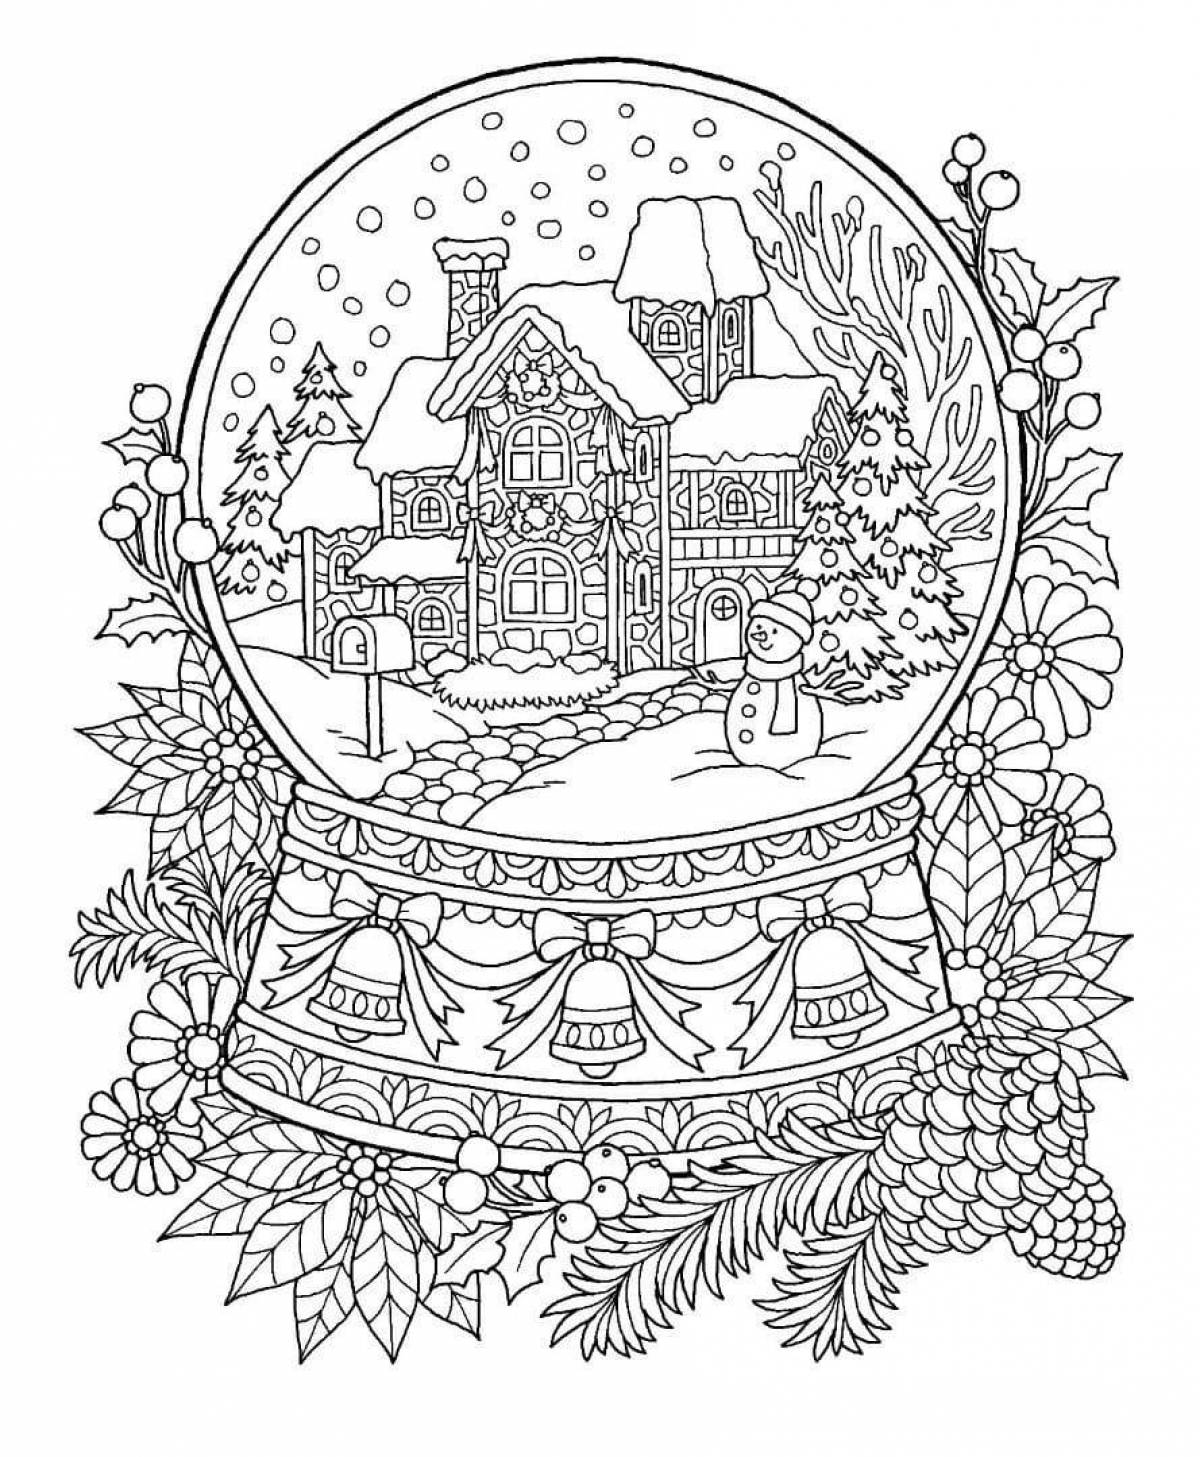 Dreamy anti-stress Christmas coloring book